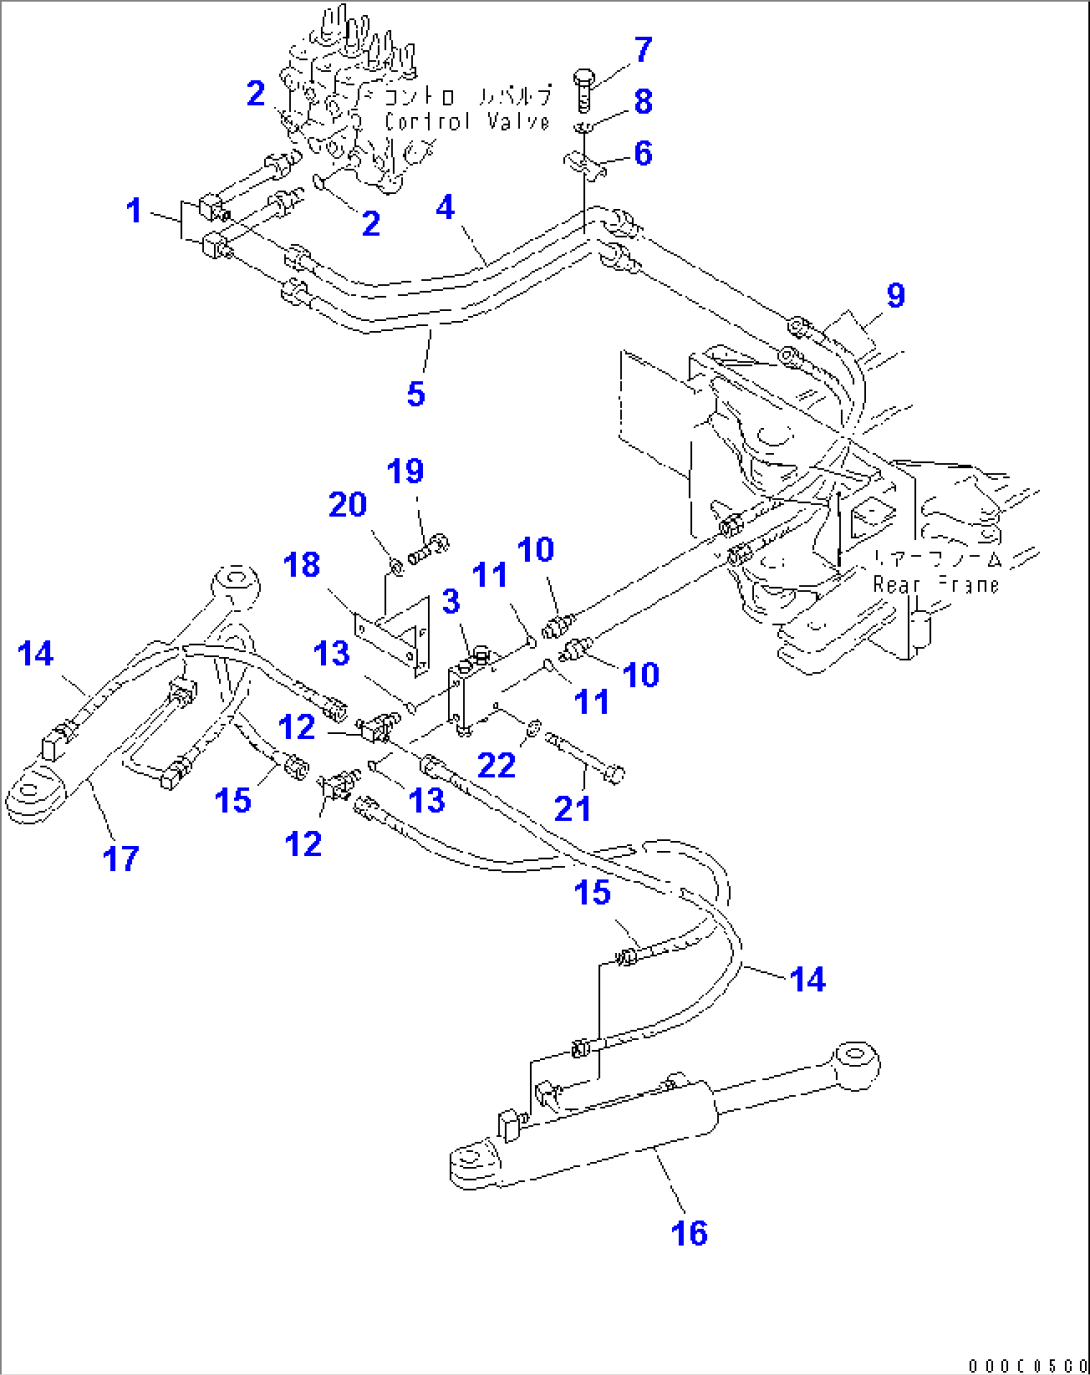 HYDRAULIC PIPING (ARTICULATE CYLINDER LINE)(#11035-)